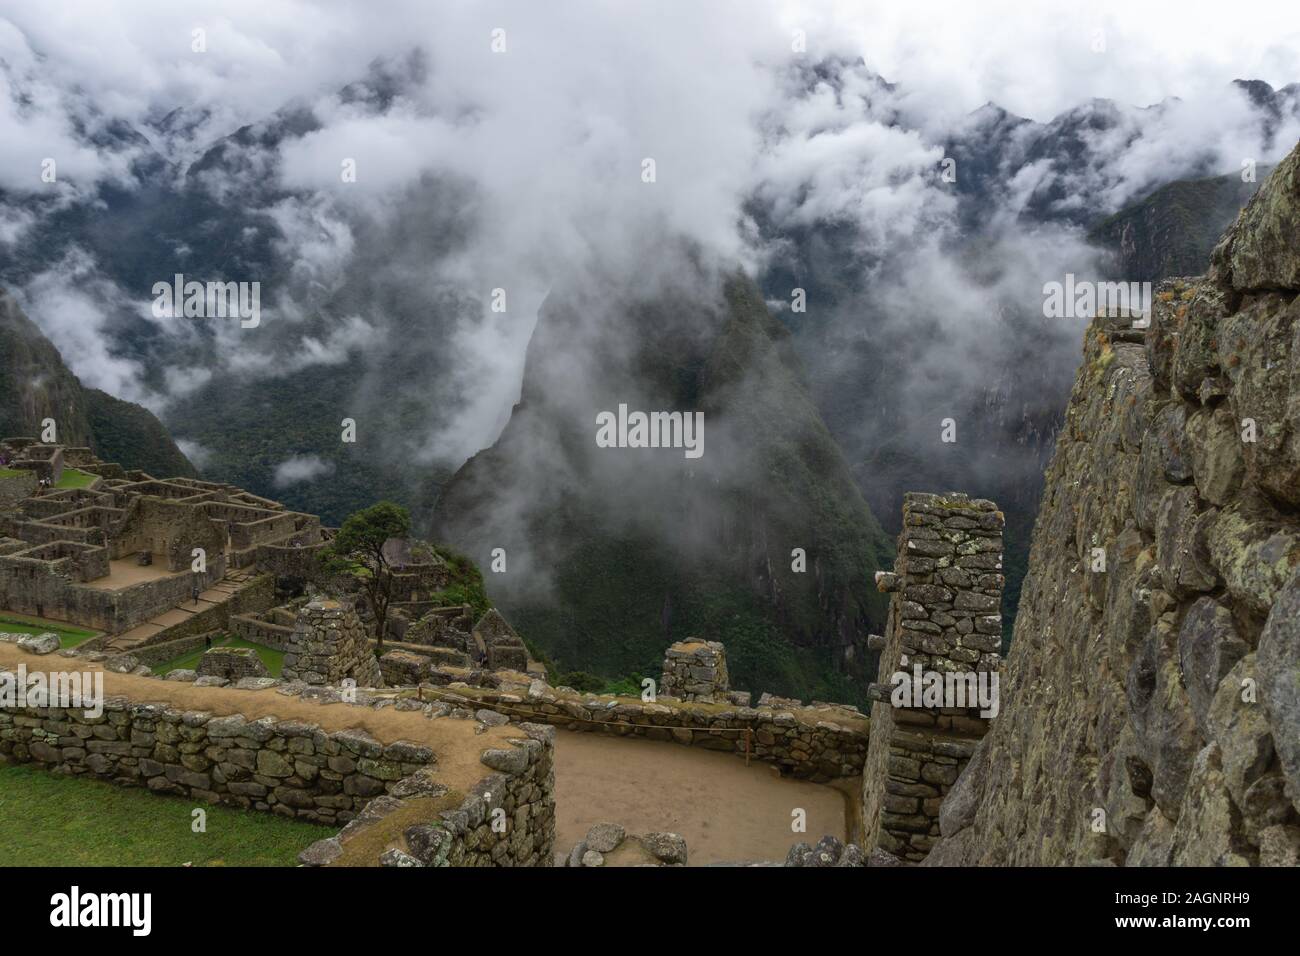 The breathtaking beauty of nature & the mystery of the archaeological site in Machu Picchu create a magical blend of reality with the unprecedented. Stock Photo